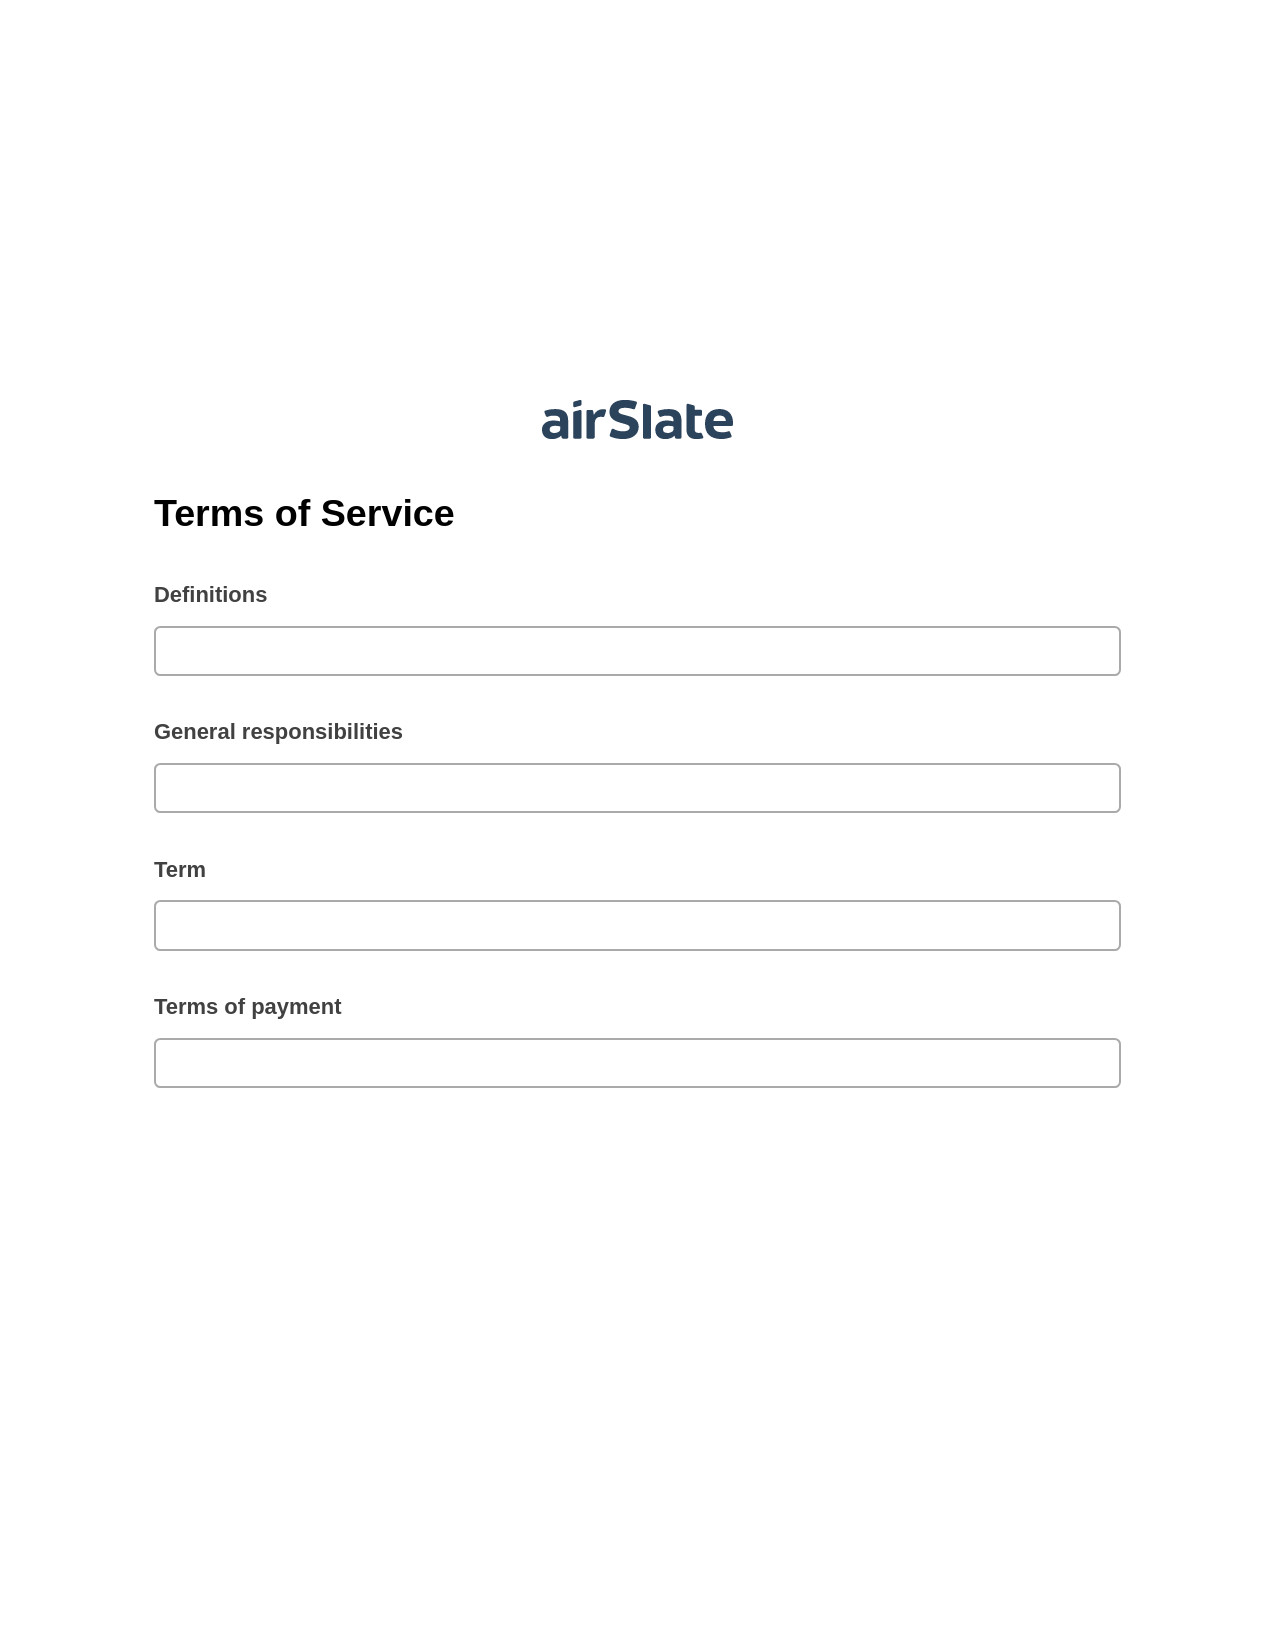 Terms of Service Pre-fill Slate from MS Dynamics 365 Records Bot, Audit Trail Bot, Export to Excel 365 Bot